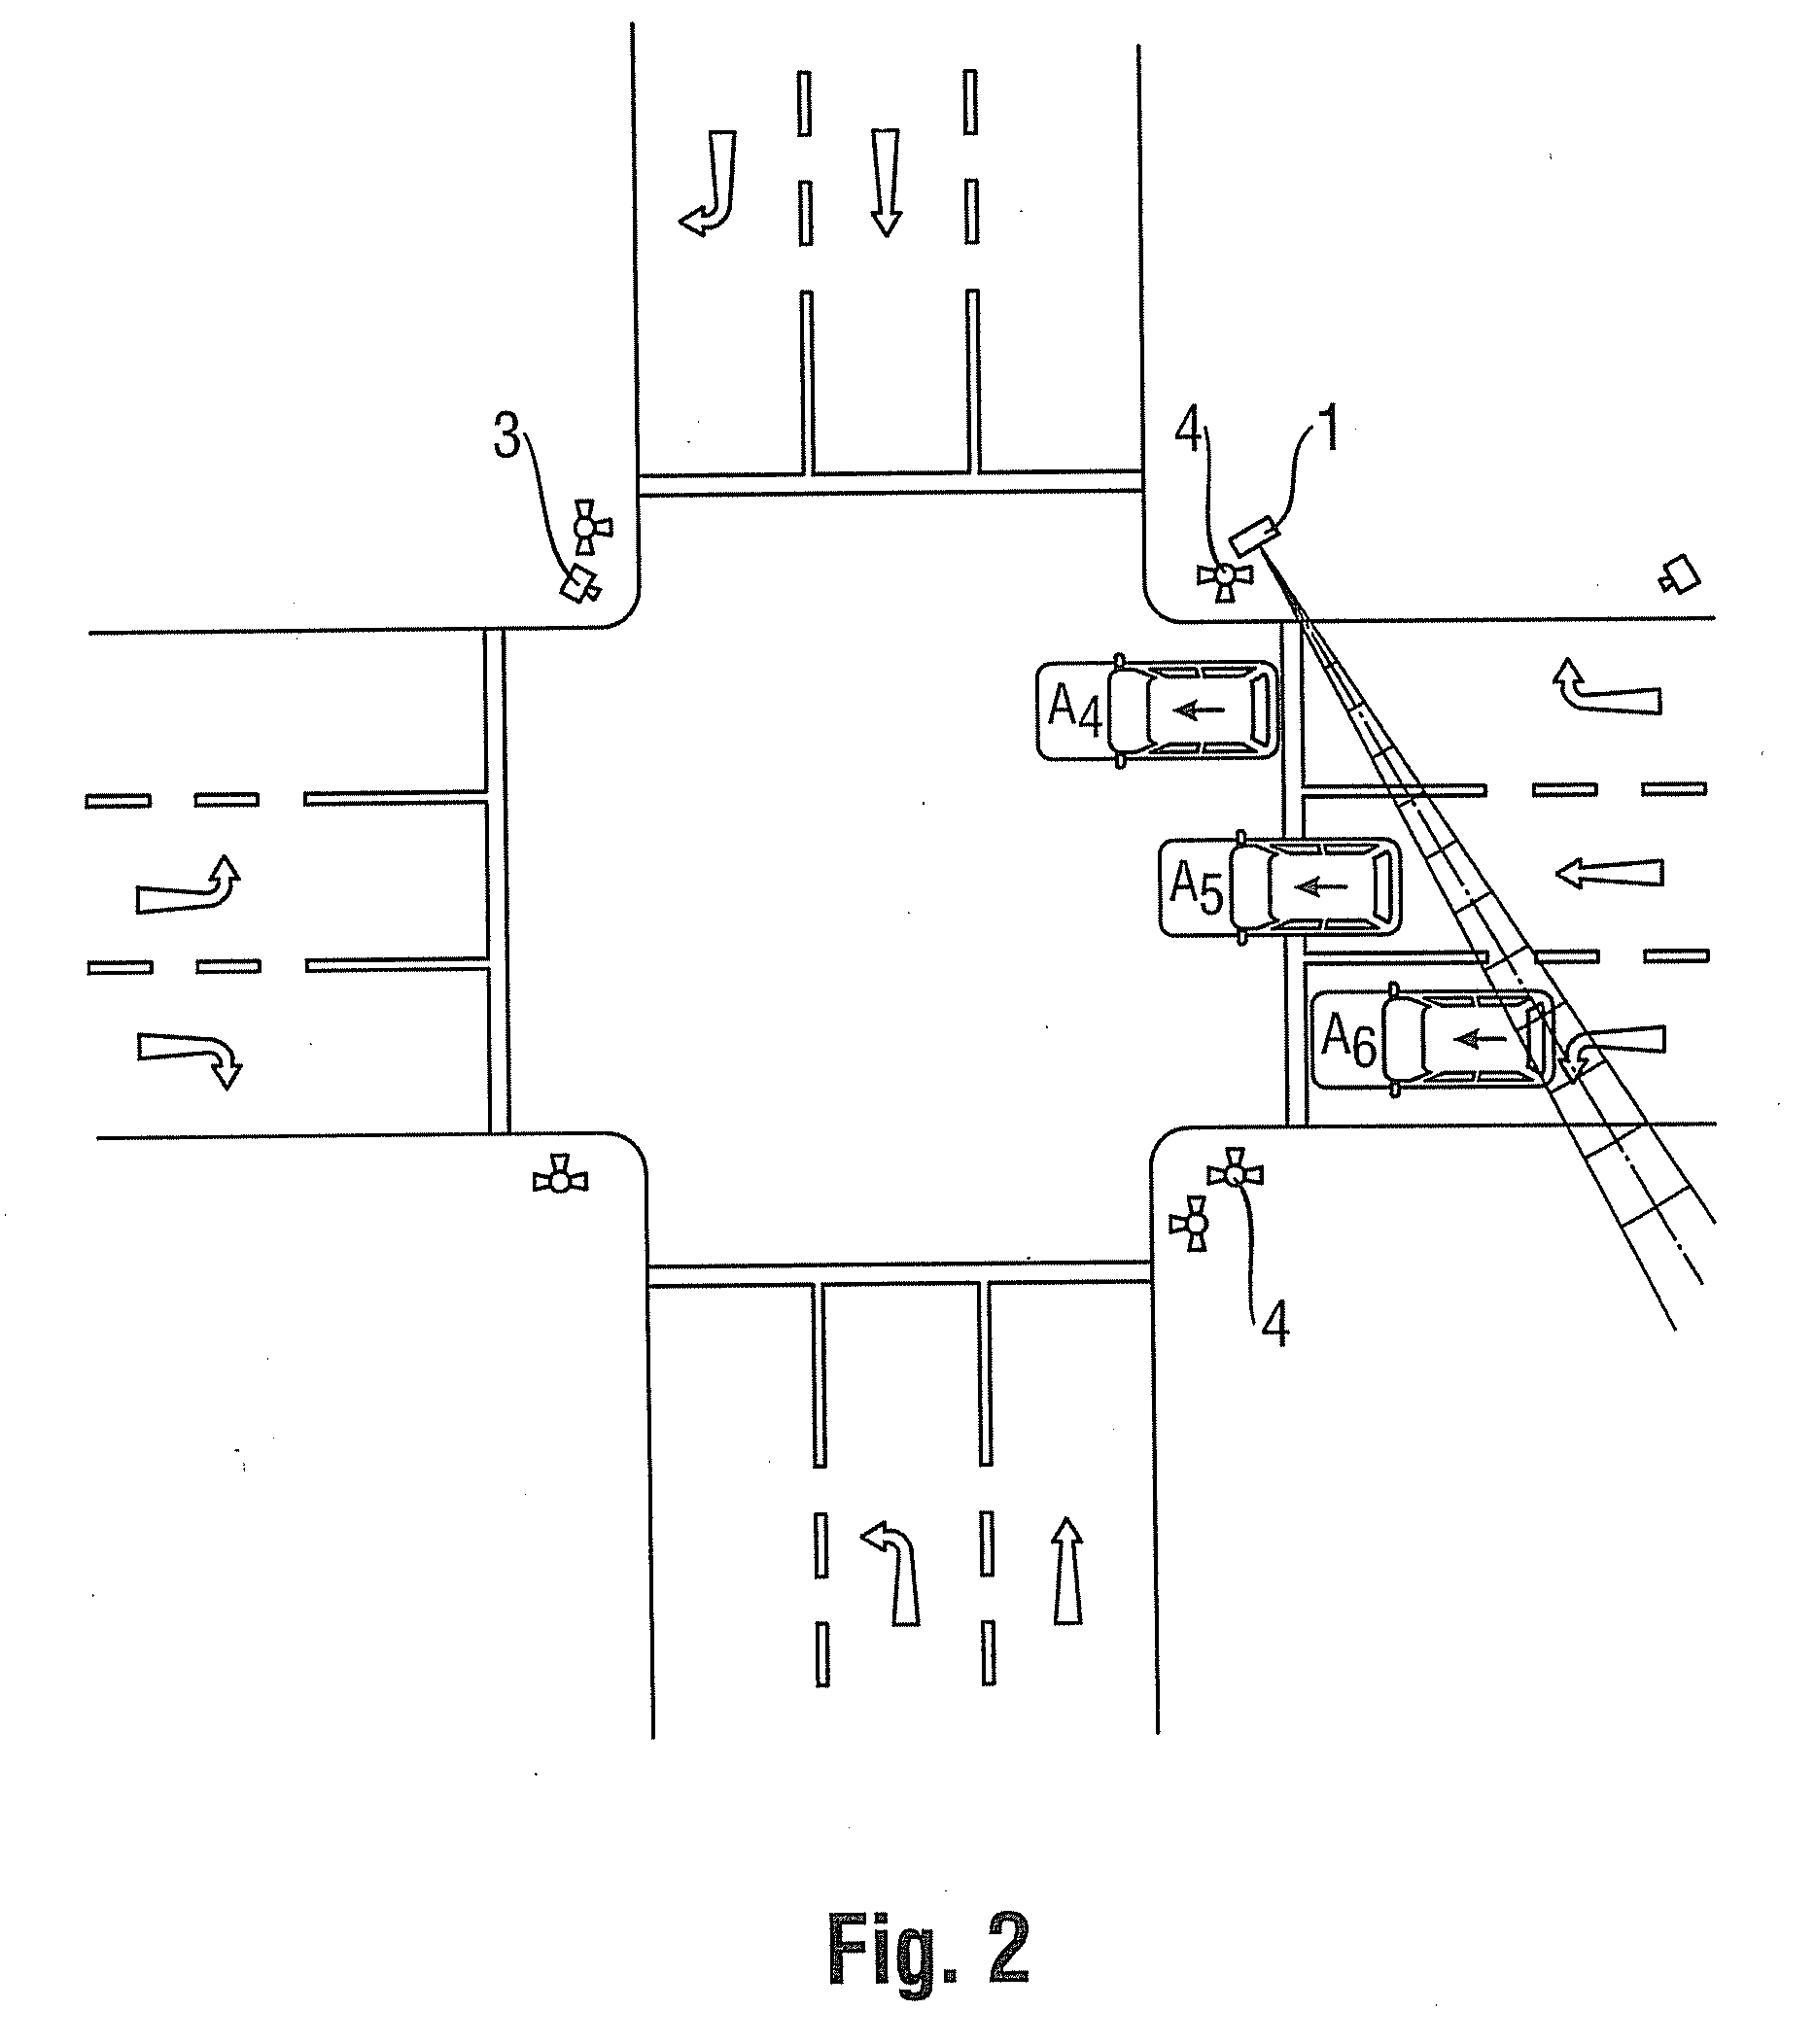 Method for Detecting and Documenting Traffic Violations at a Traffic Light